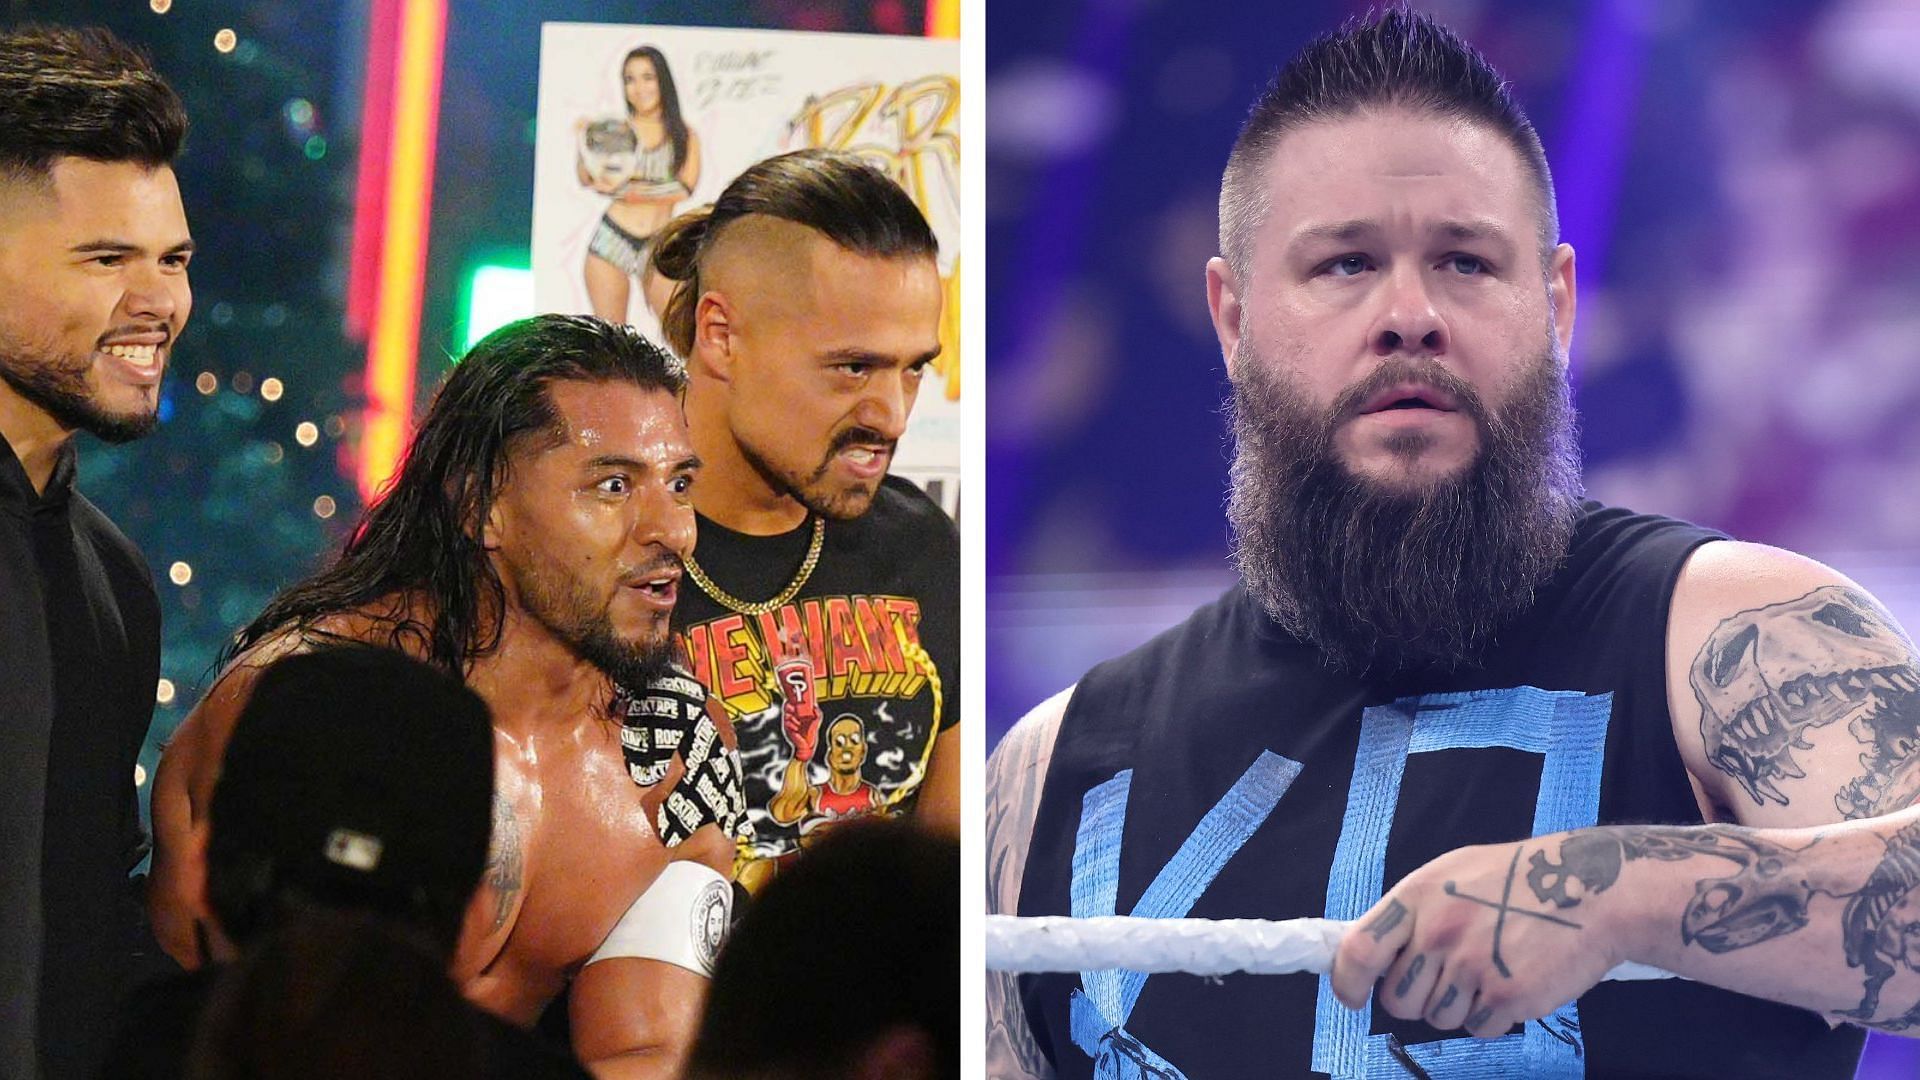 Santos Escobar will clash with Kevin Owens on WWE SmackDown